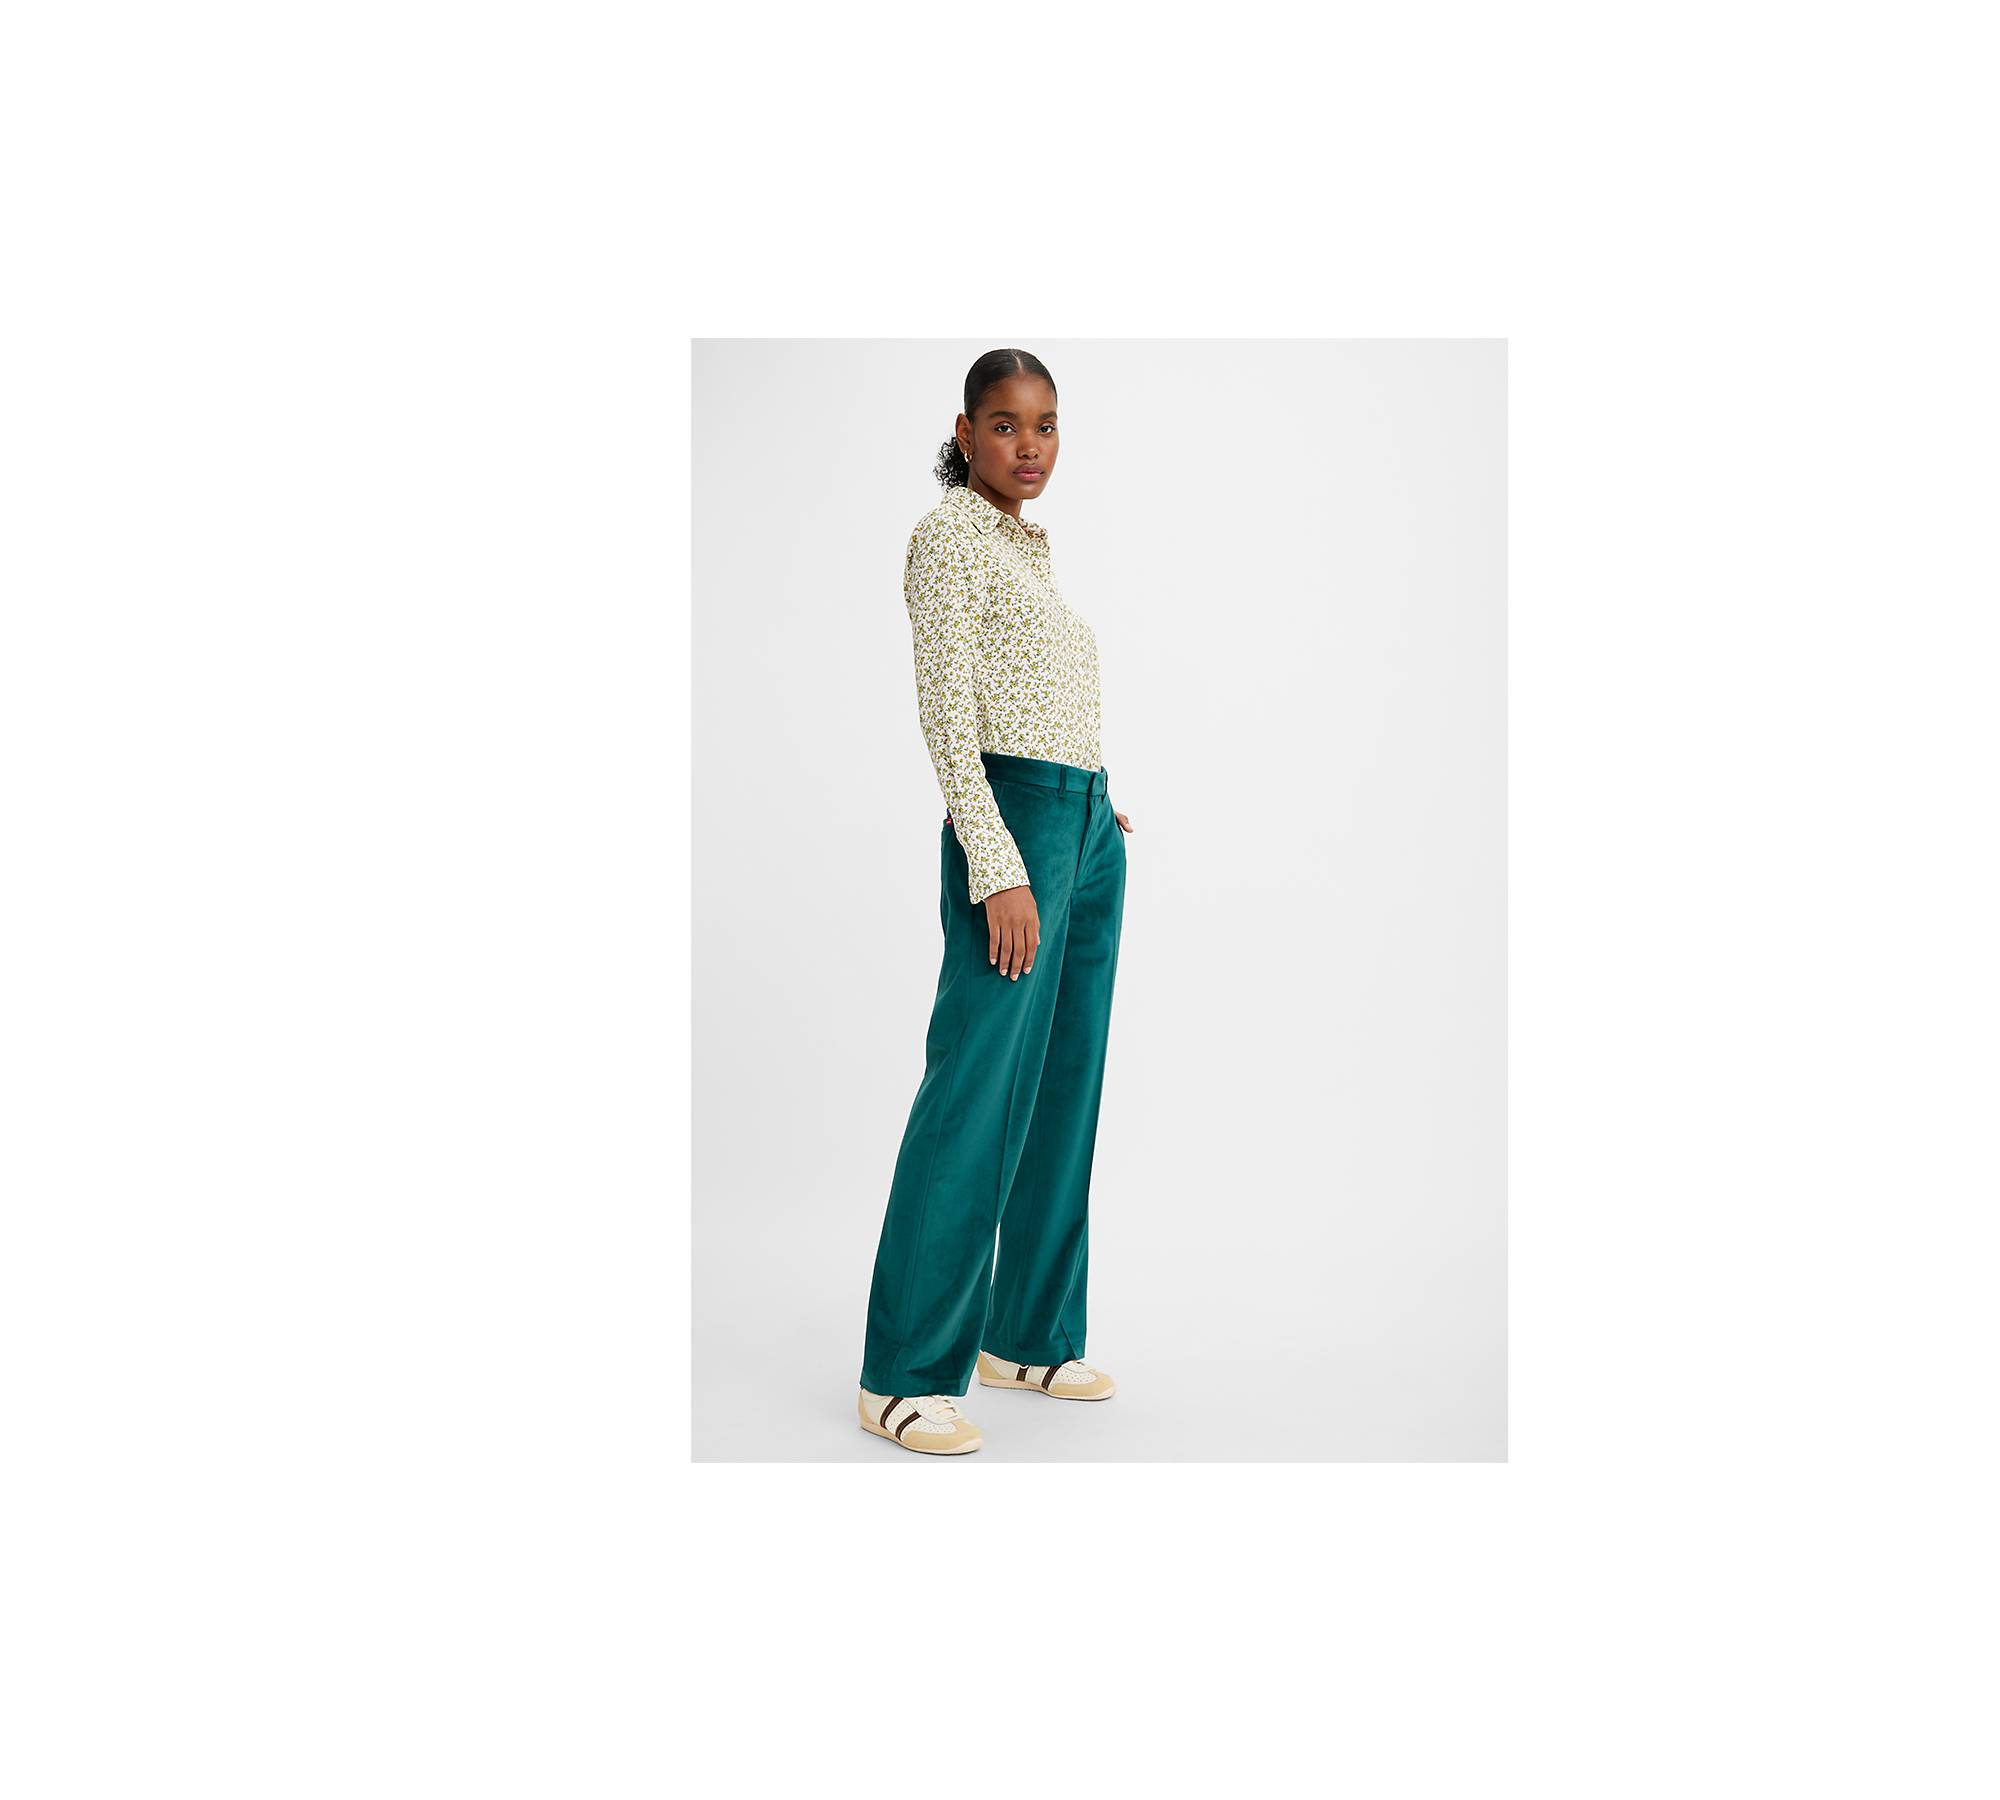 Baggy Trousers - Green